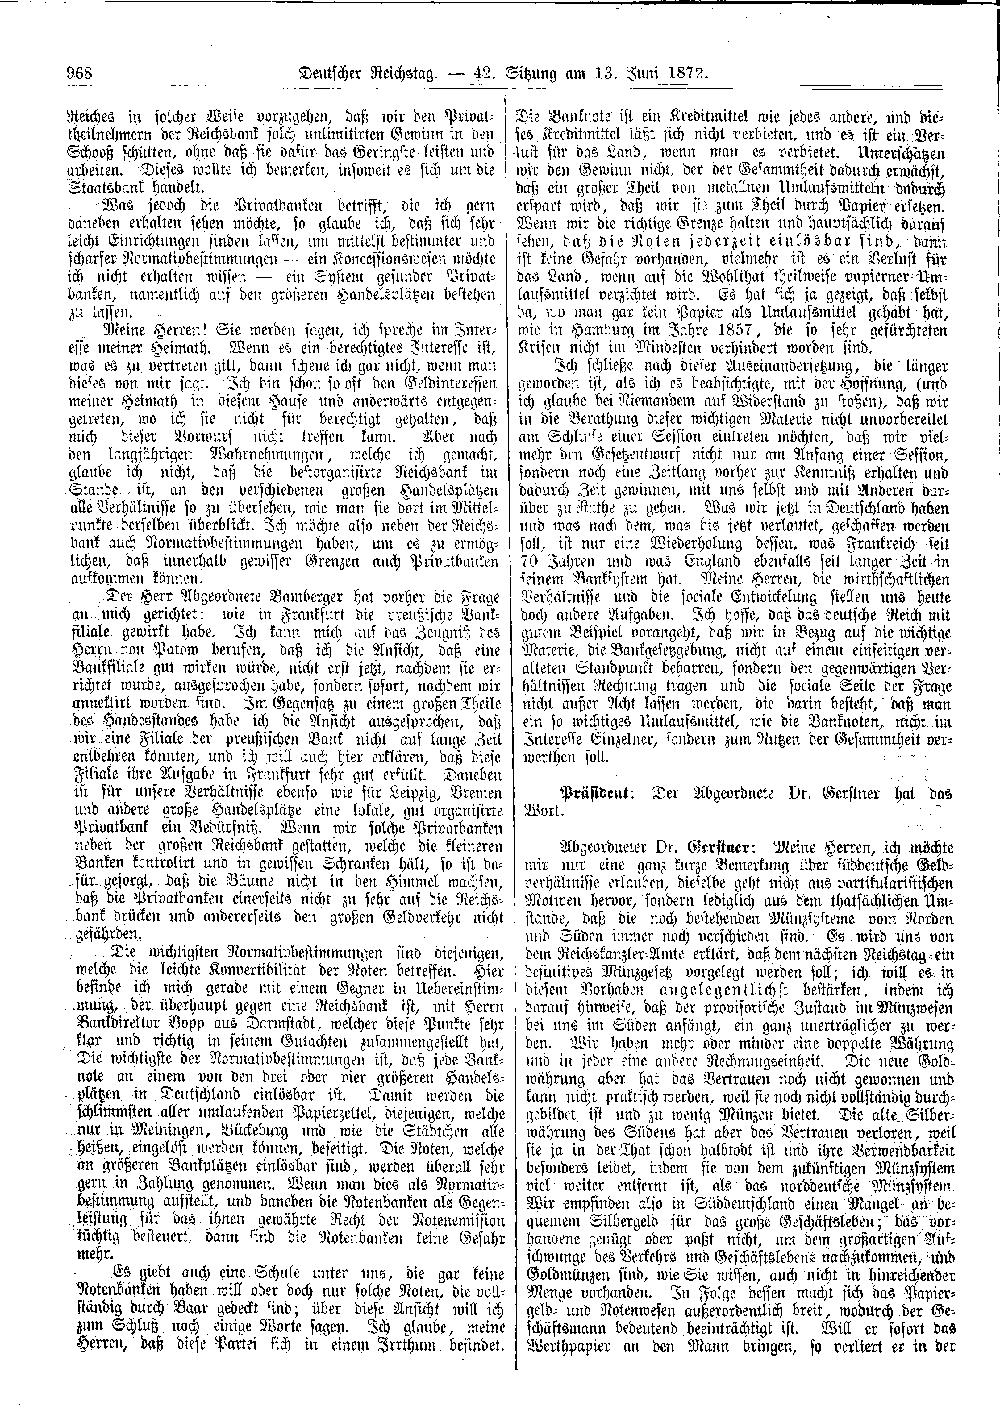 Scan of page 968